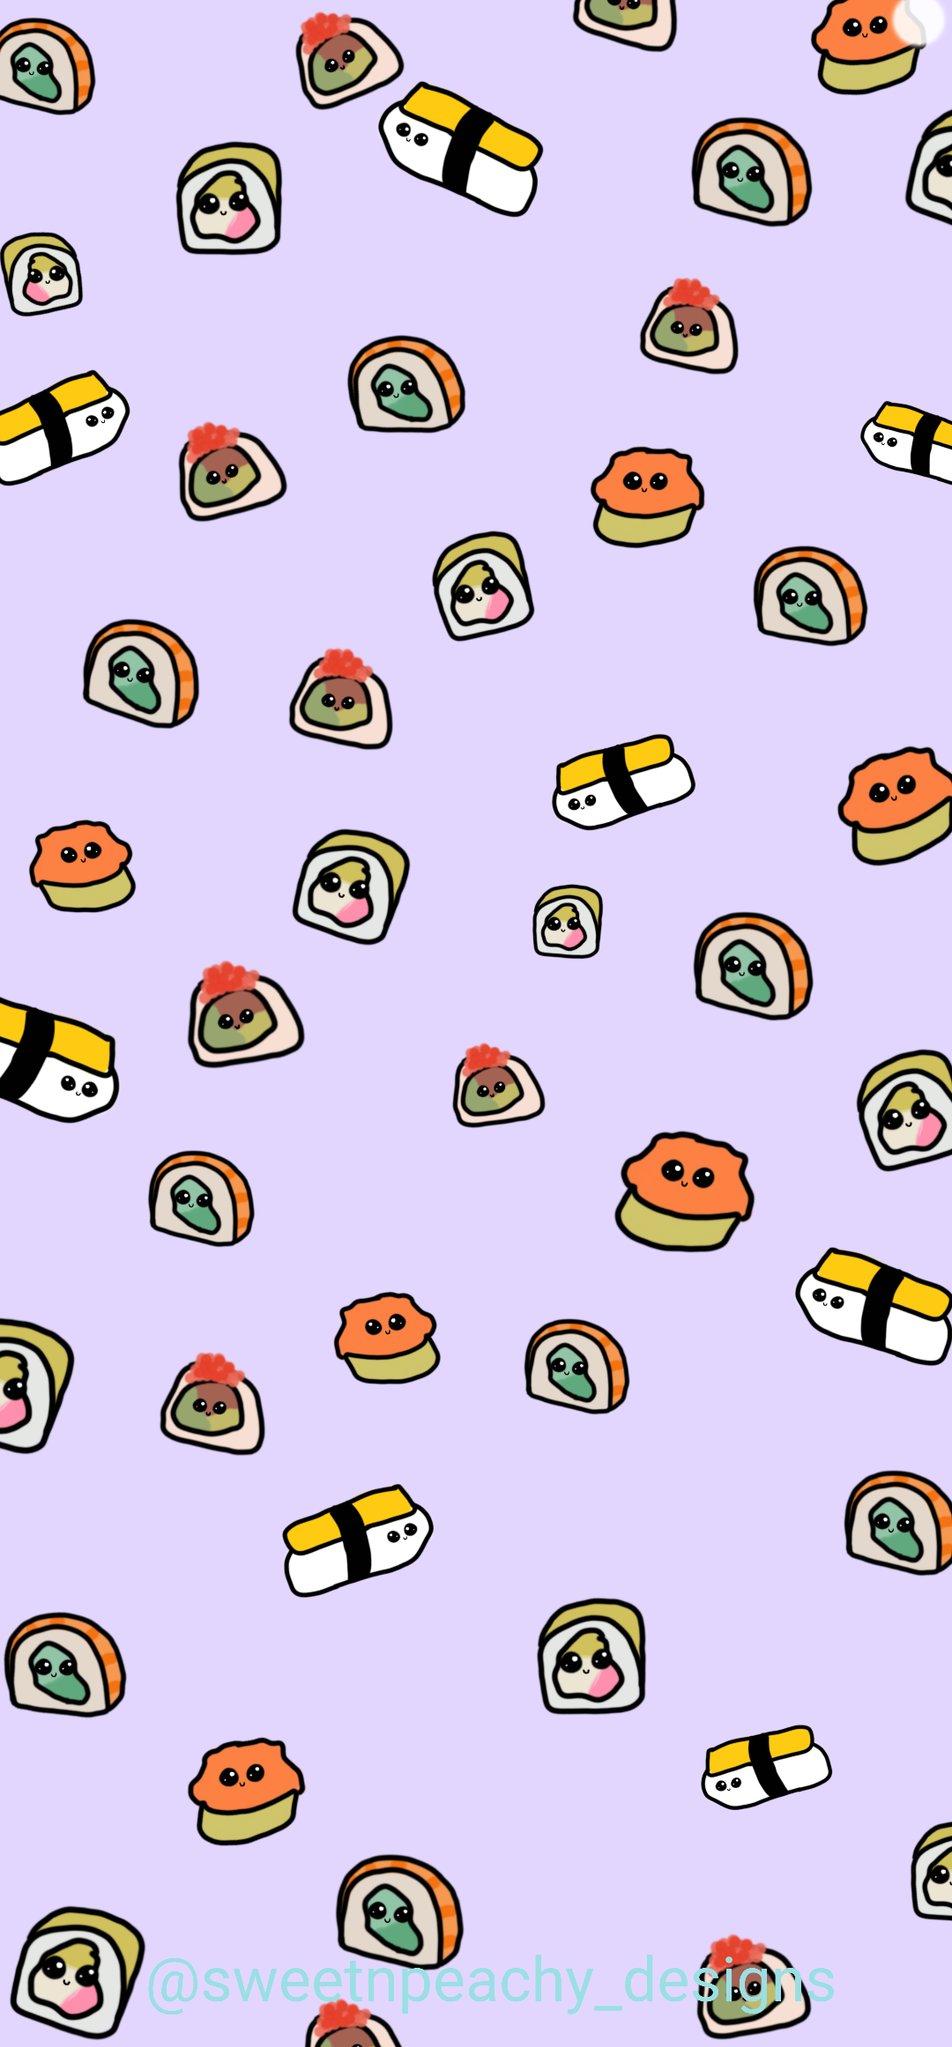 Sweet N Peachy Designs On X This Wallpaper Is An Adorable